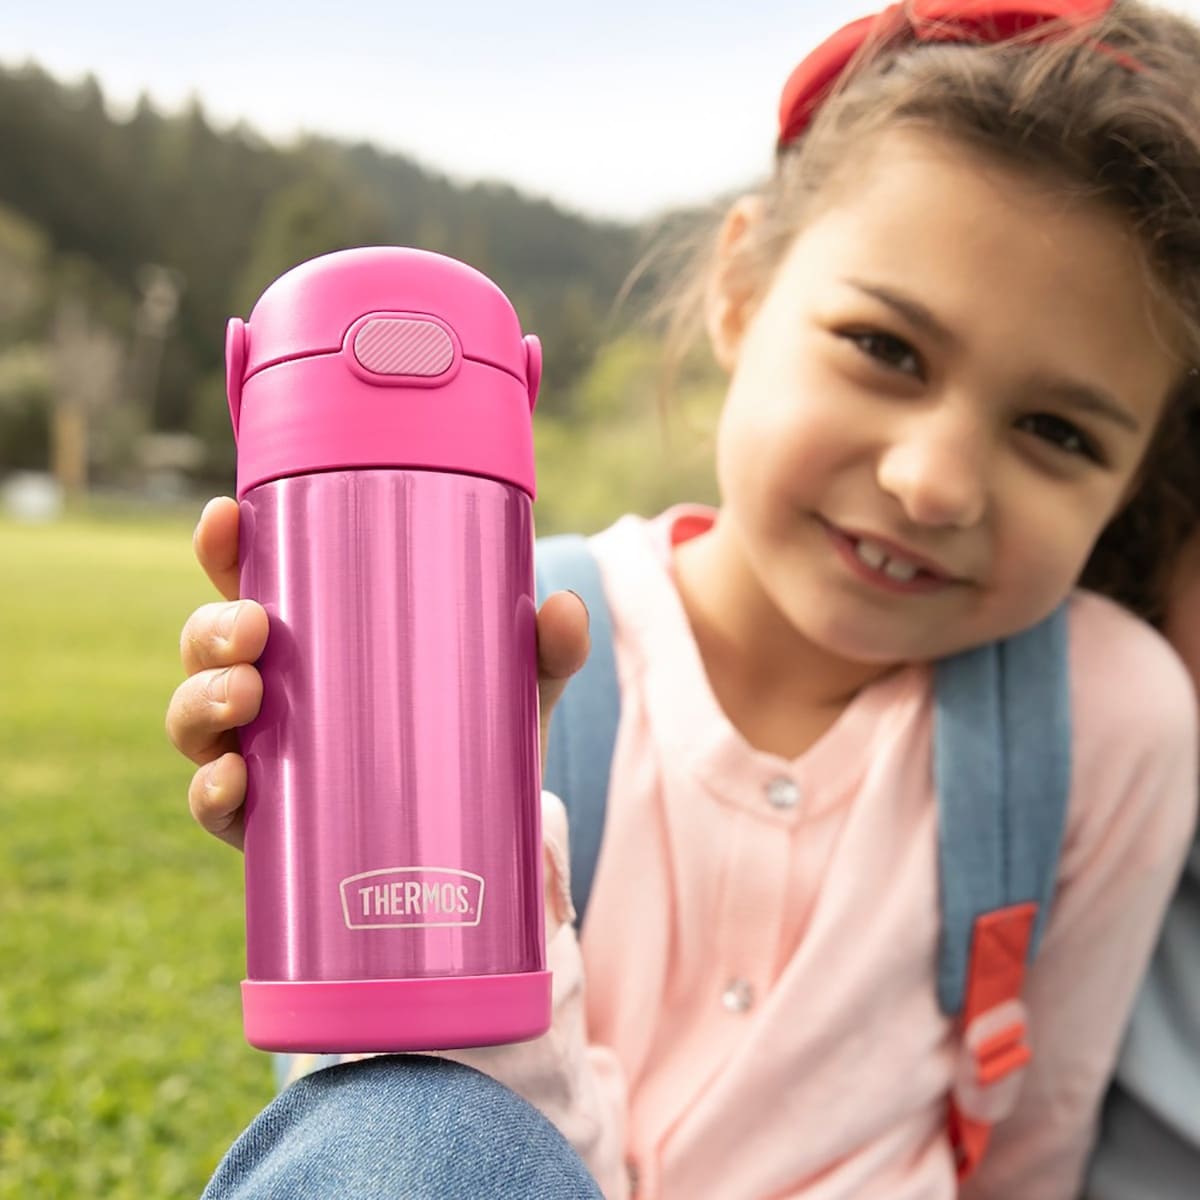 https://ak1.ostkcdn.com/images/products/is/images/direct/60d30dd6046f25e936c3e037296bfbd001121188/Thermos-12-oz.-Kid%27s-Funtainer-Insulated-Stainless-Steel-Water-Bottle.jpg